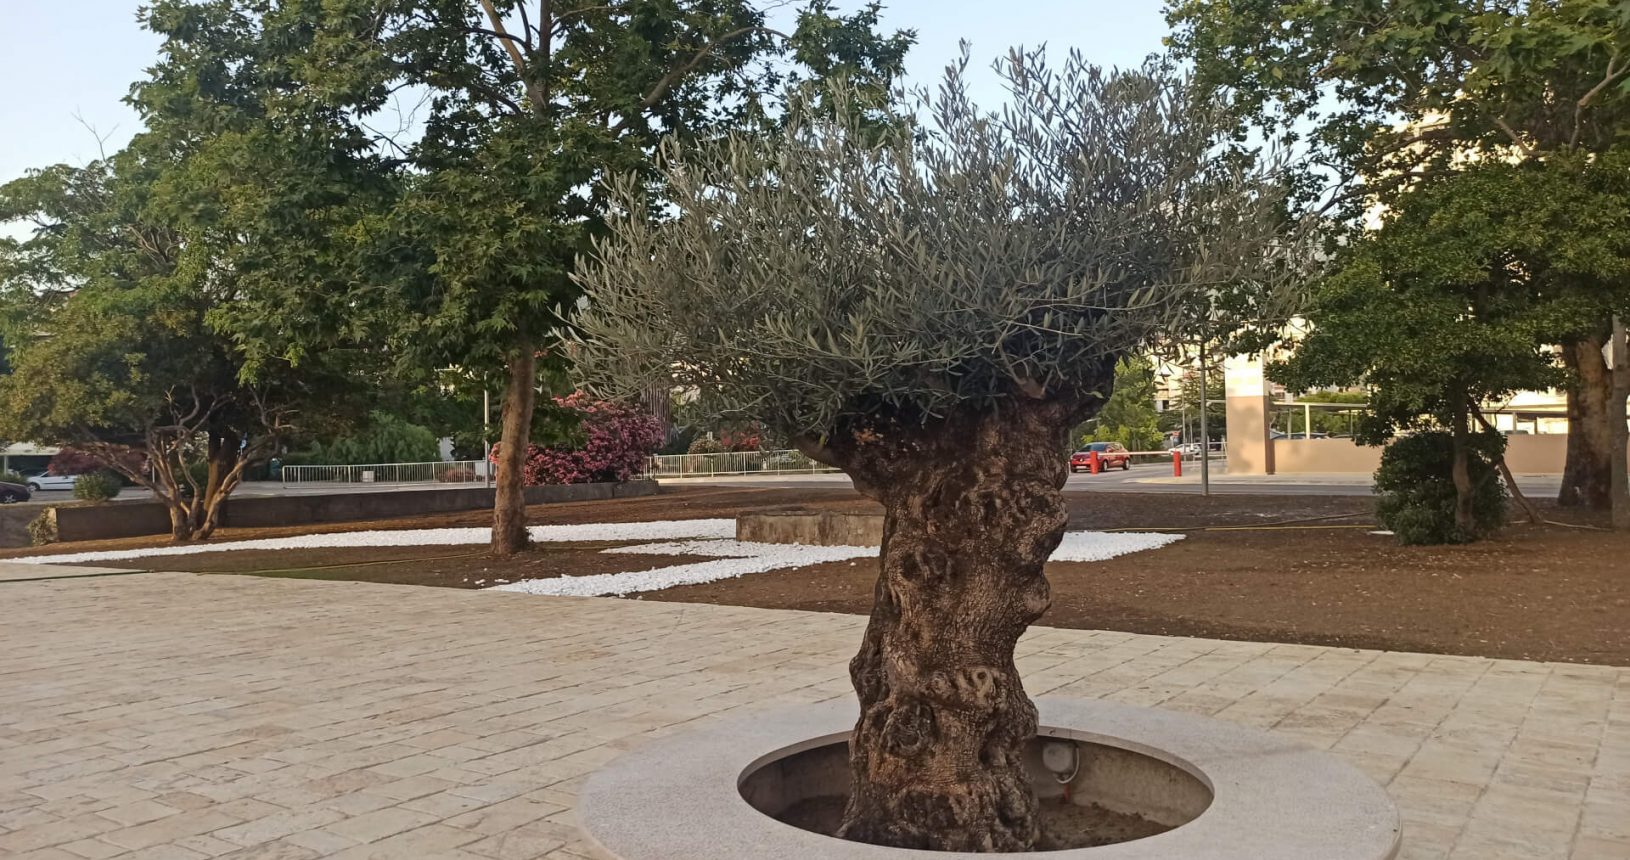 Flowerbed in a new square near fountain